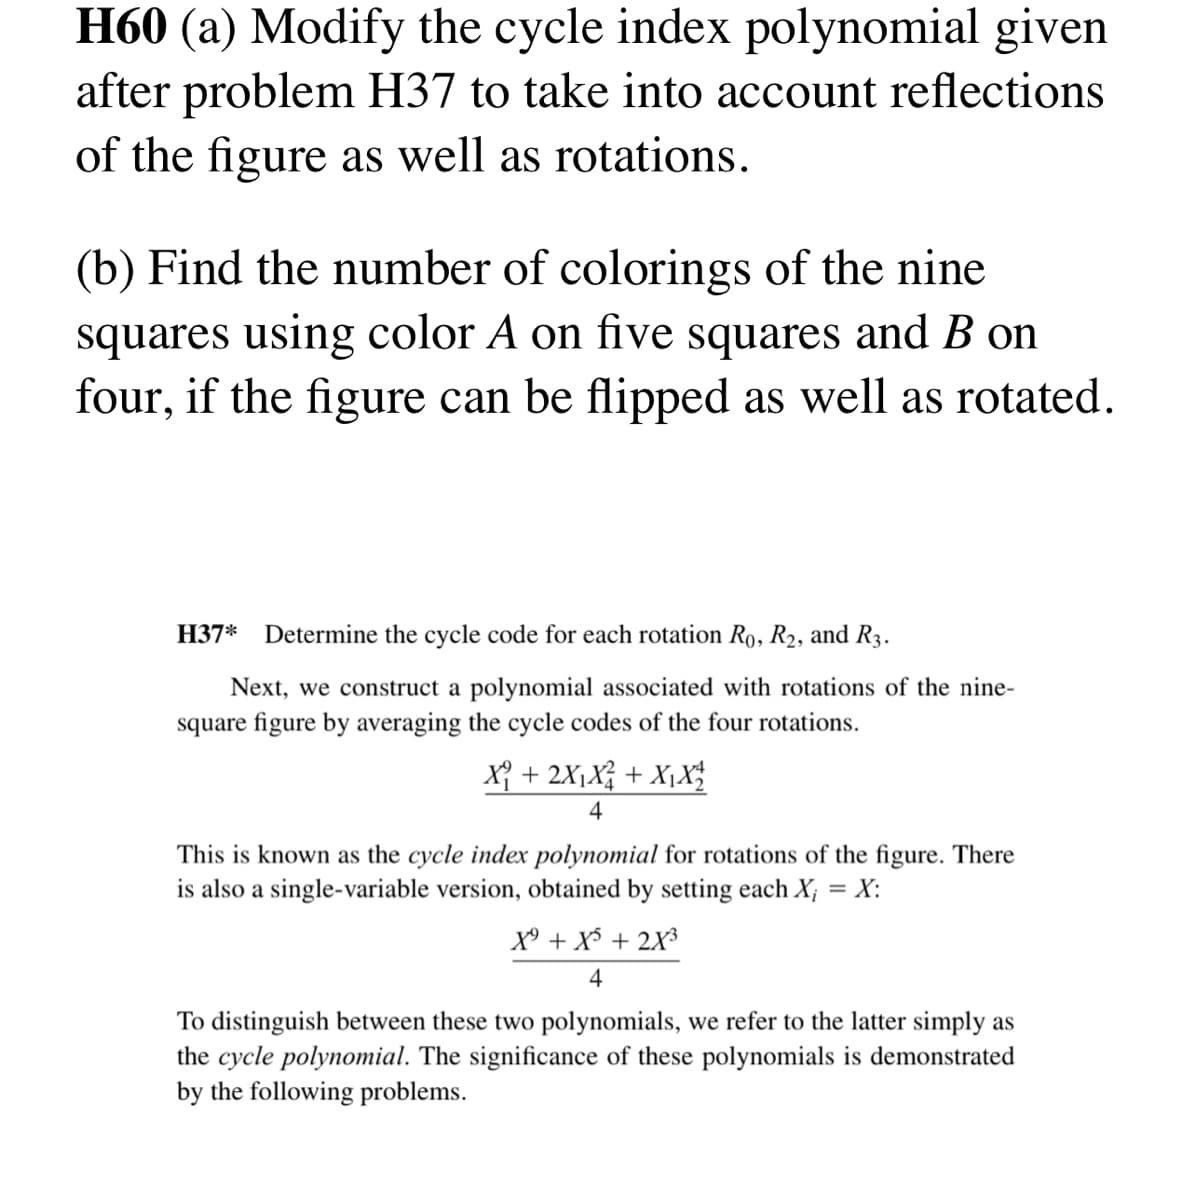 H60 (a) Modify the cycle index polynomial given
after problem H37 to take into account reflections
of the figure as well as rotations.
(b) Find the number of colorings of the nine
squares using color A on five squares and B on
four, if the figure can be flipped as well as rotated.
H37*
Determine the cycle code for each rotation R₁, R₂, and R3.
Next, we construct a polynomial associated with rotations of the nine-
square figure by averaging the cycle codes of the four rotations.
X₁ + 2X₁X² + X₁ X₂
4
This is known as the cycle index polynomial for rotations of the figure. There
is also a single-variable version, obtained by setting each X; = X:
X⁹ + X³ + 2X³
4
To distinguish between these two polynomials, we refer to the latter simply as
the cycle polynomial. The significance of these polynomials is demonstrated
by the following problems.